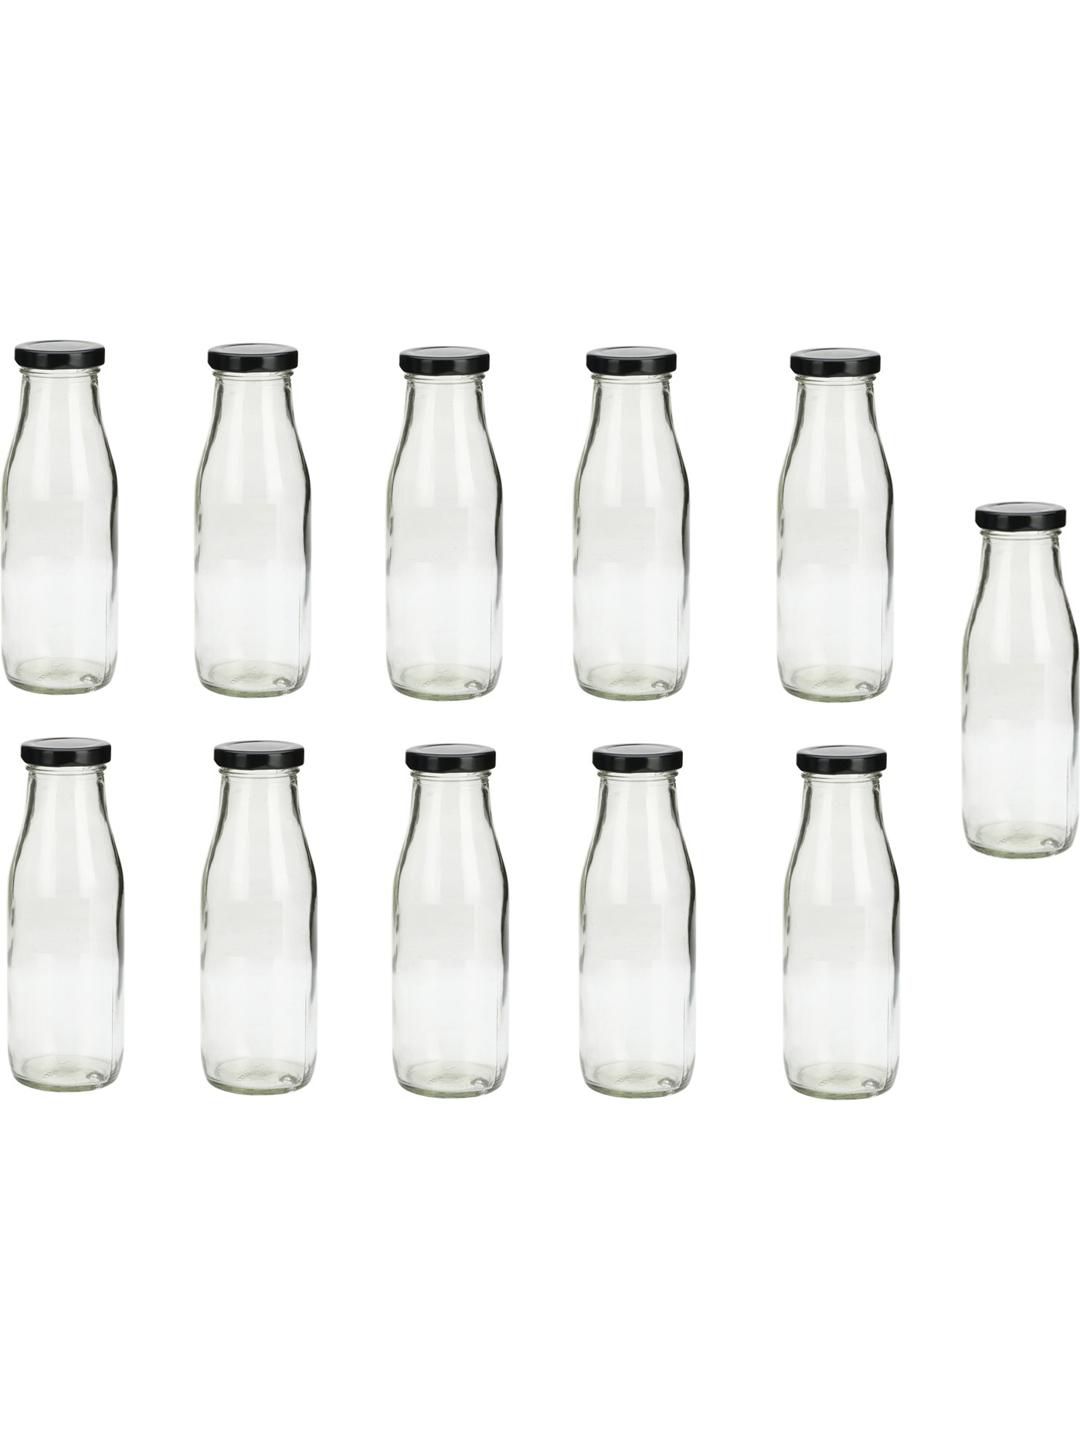     			AFAST Multipurpose Bottle Glass Transparent Utility Container ( Set of 11 )